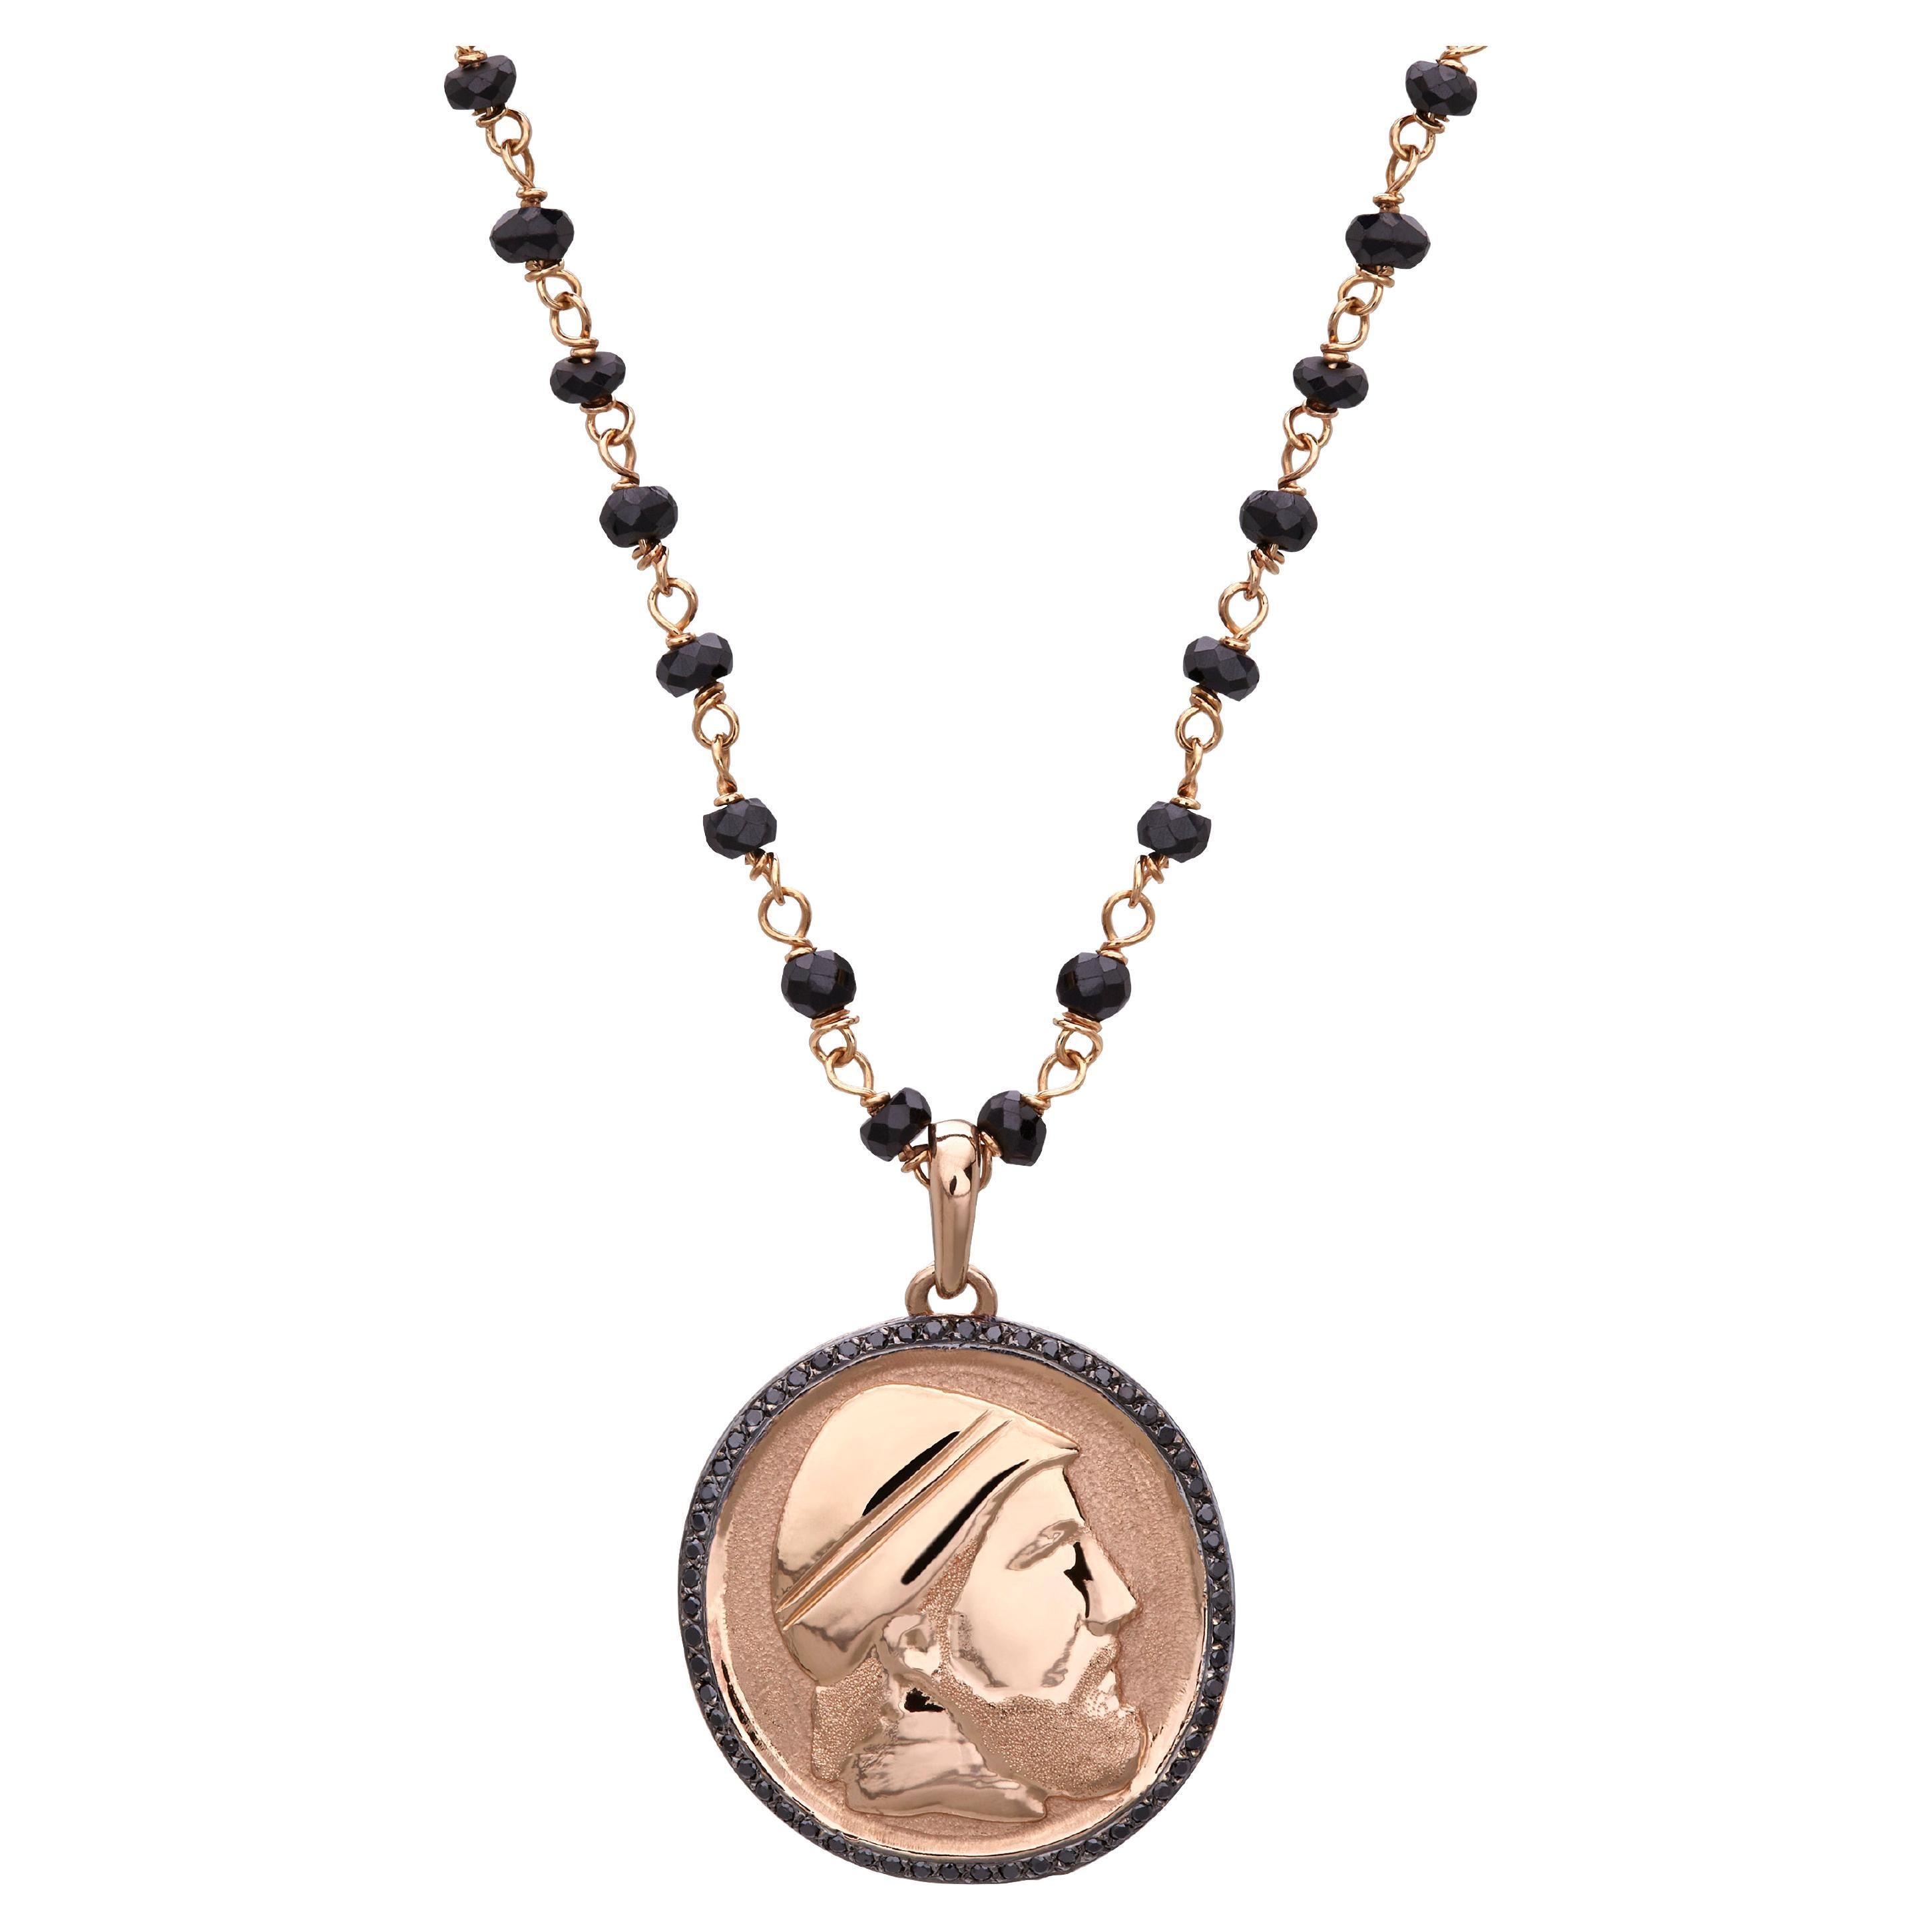 King Odysseus Pendant Necklace in 18Kt Rose Gold with Black Diamonds and Onyx